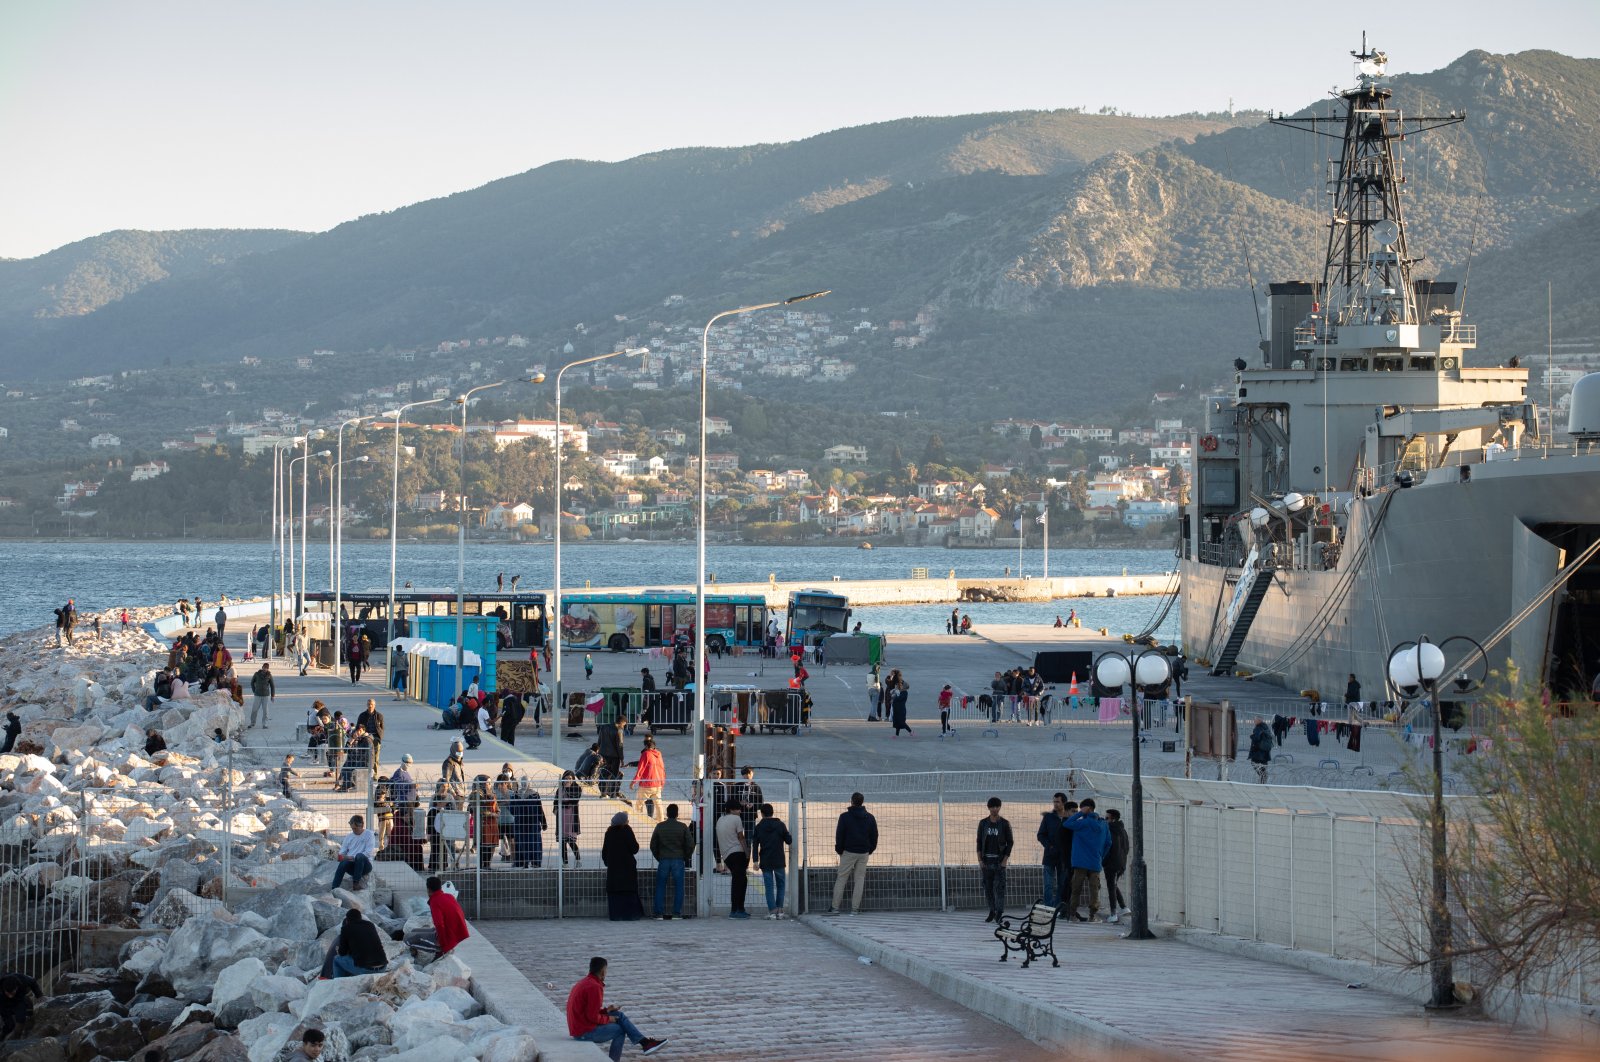 A Greek navy ship serves as a temporary shelter for 400-600 migrants who have arrived since the beginning of March in the port of Mytilene on the Greek island of Lesbos, following Turkey's decision to open its borders and Greece's decision to stop registering new asylum applications, March 15, 2020. (Reuters Photo)